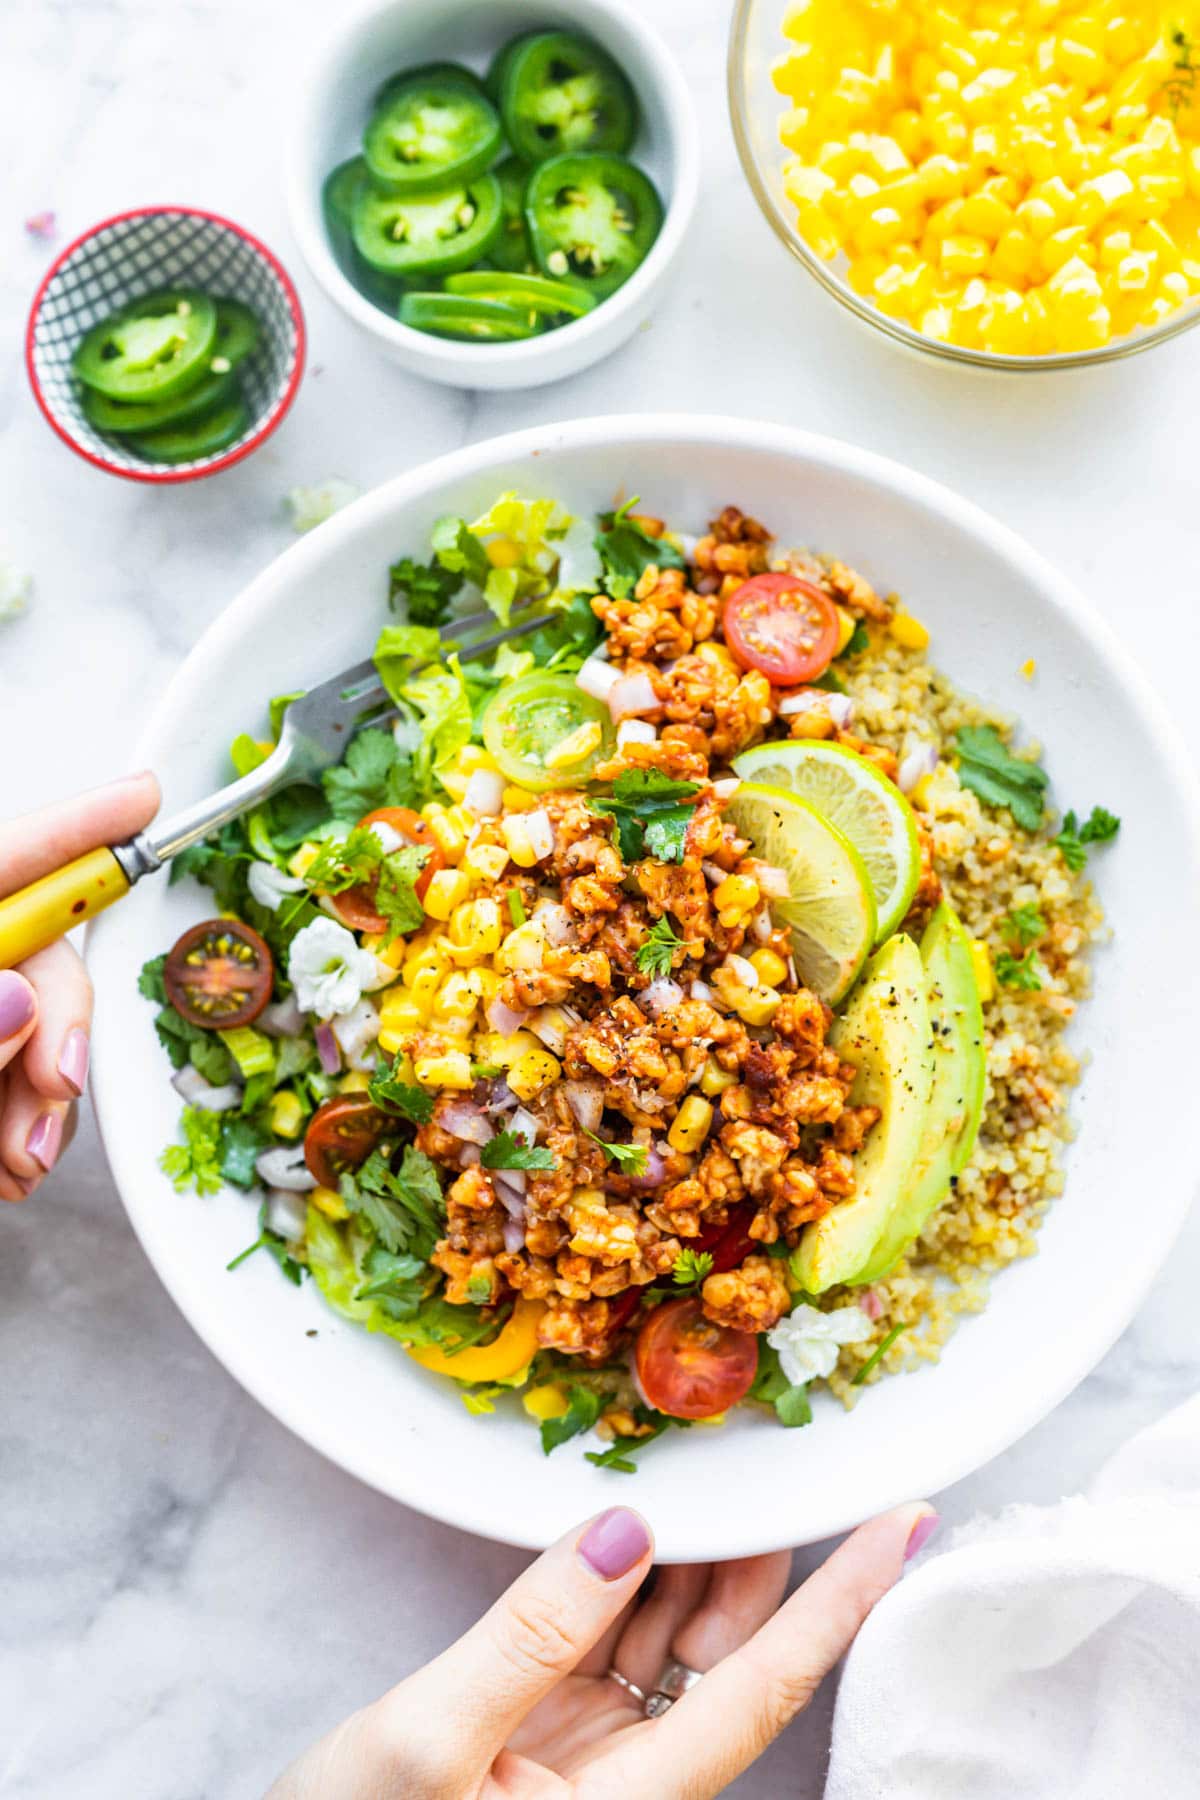 BBQ Tempeh quinoa salad topped with corn, limes, tomatoes, and avocado slices served in white bowl, a hand holding a fork going into salad.